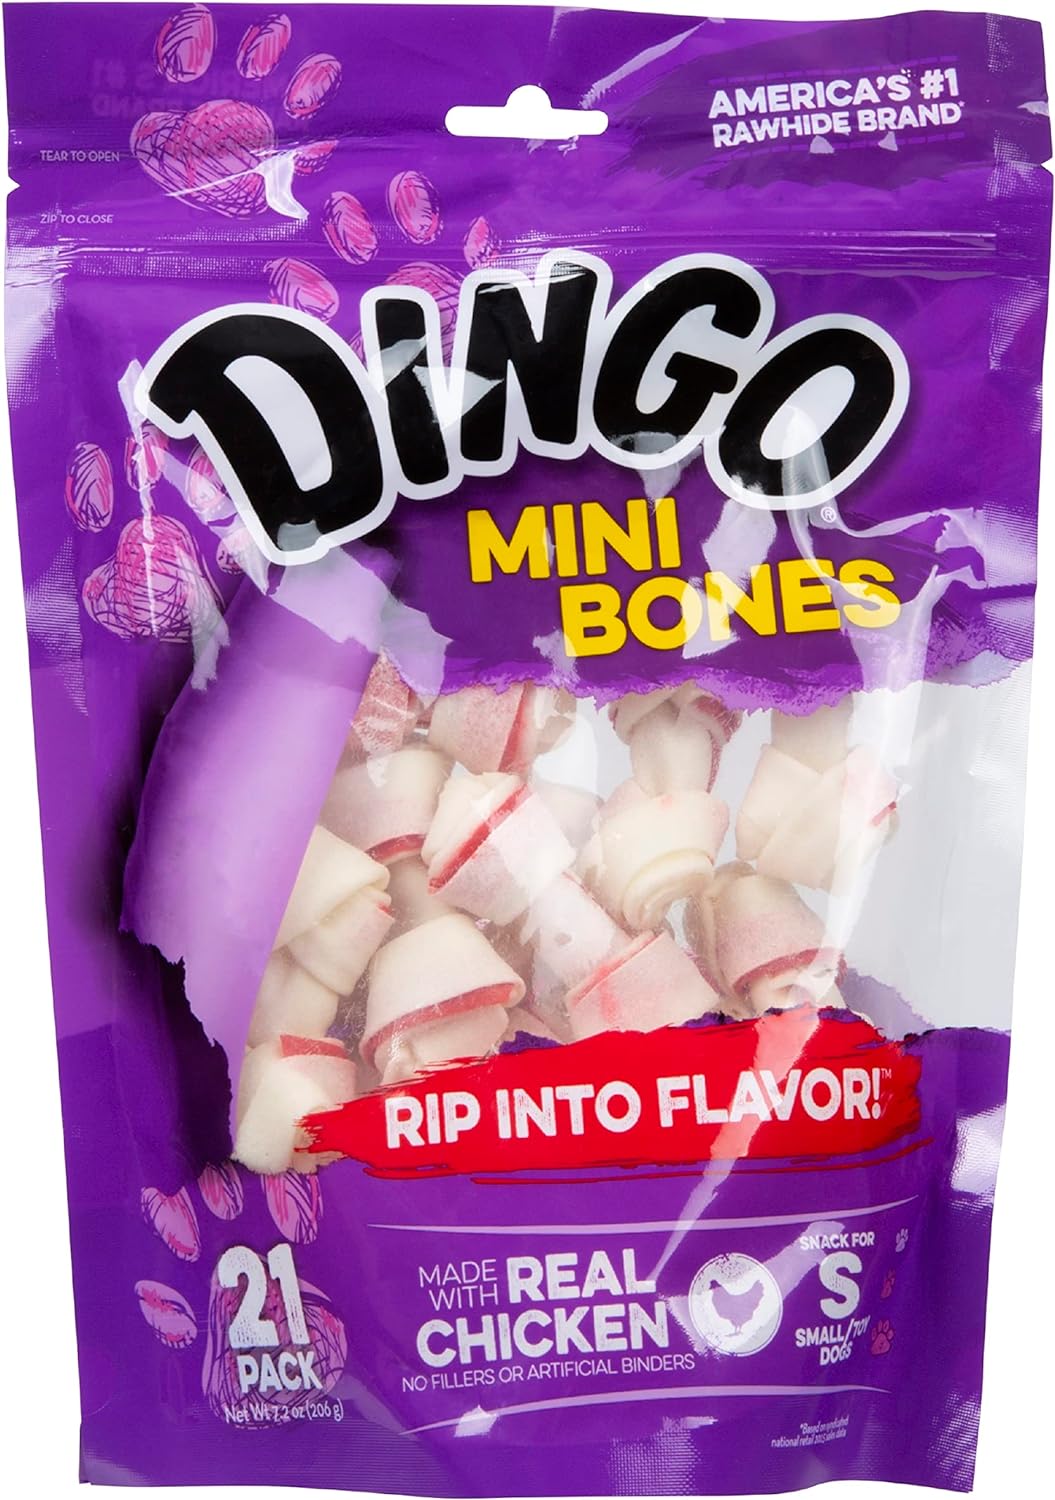 Dingo Mini Bones Rawhide for Dogs, Dog Chews Made with Real Chicken